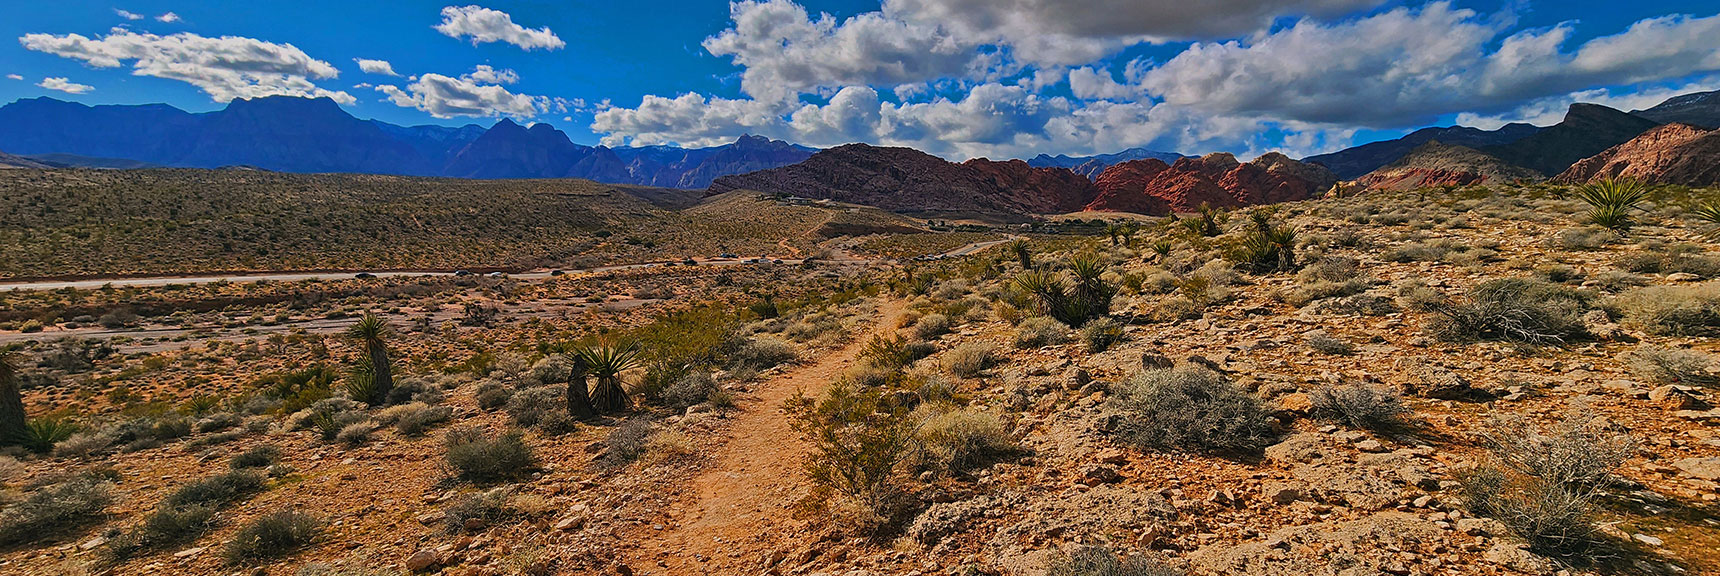 Gene's Trailhead Comes into View at Ridgeline Summit | Calico Basin Daily Workout Trails | Calico Basin, Nevada